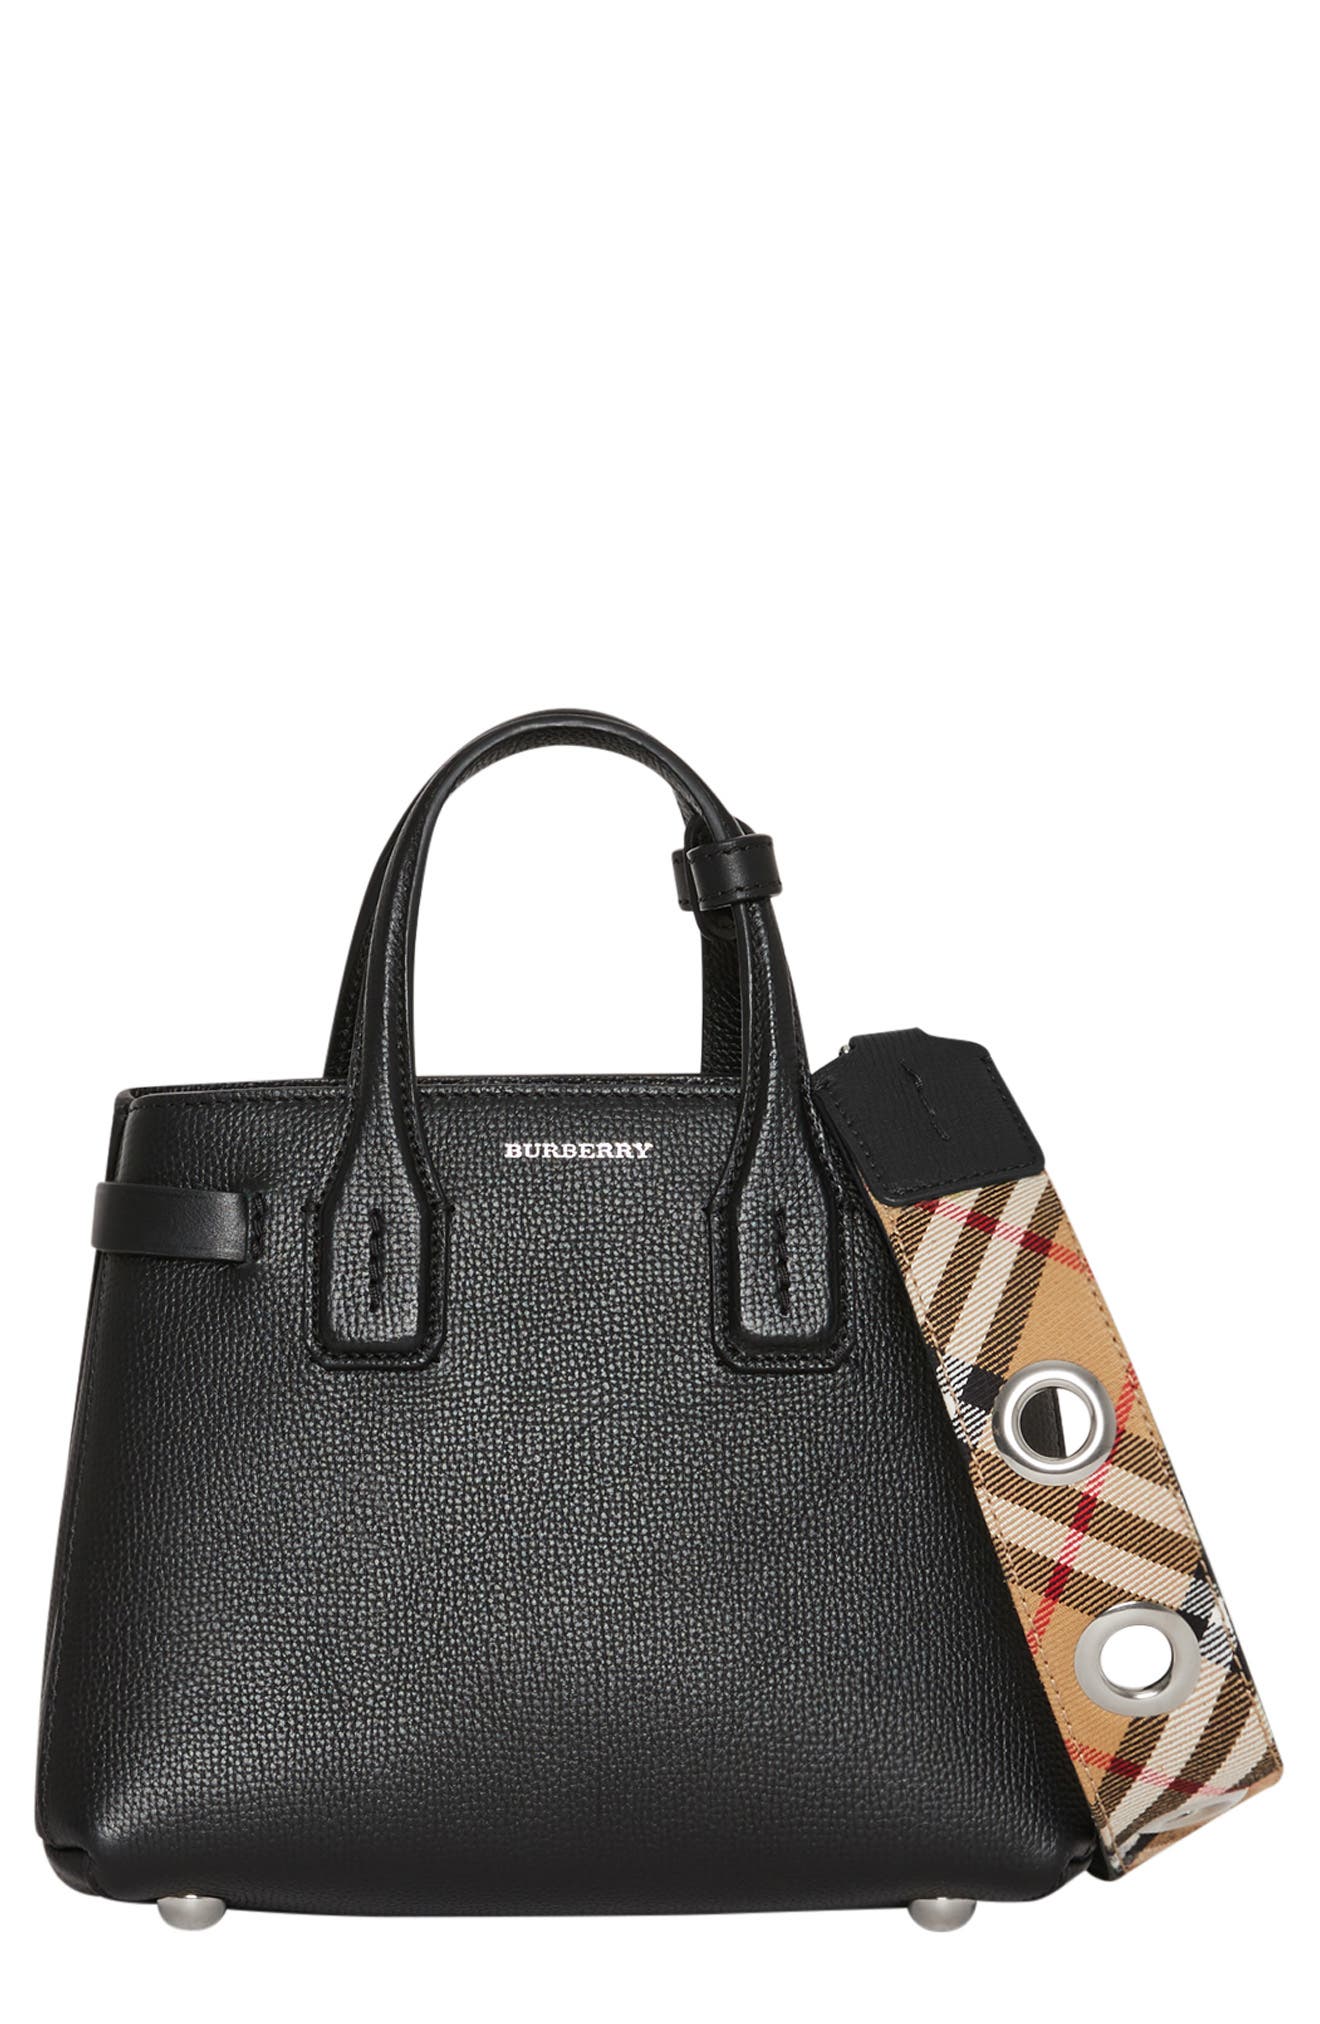 Burberry Baby Banner Leather Satchel 